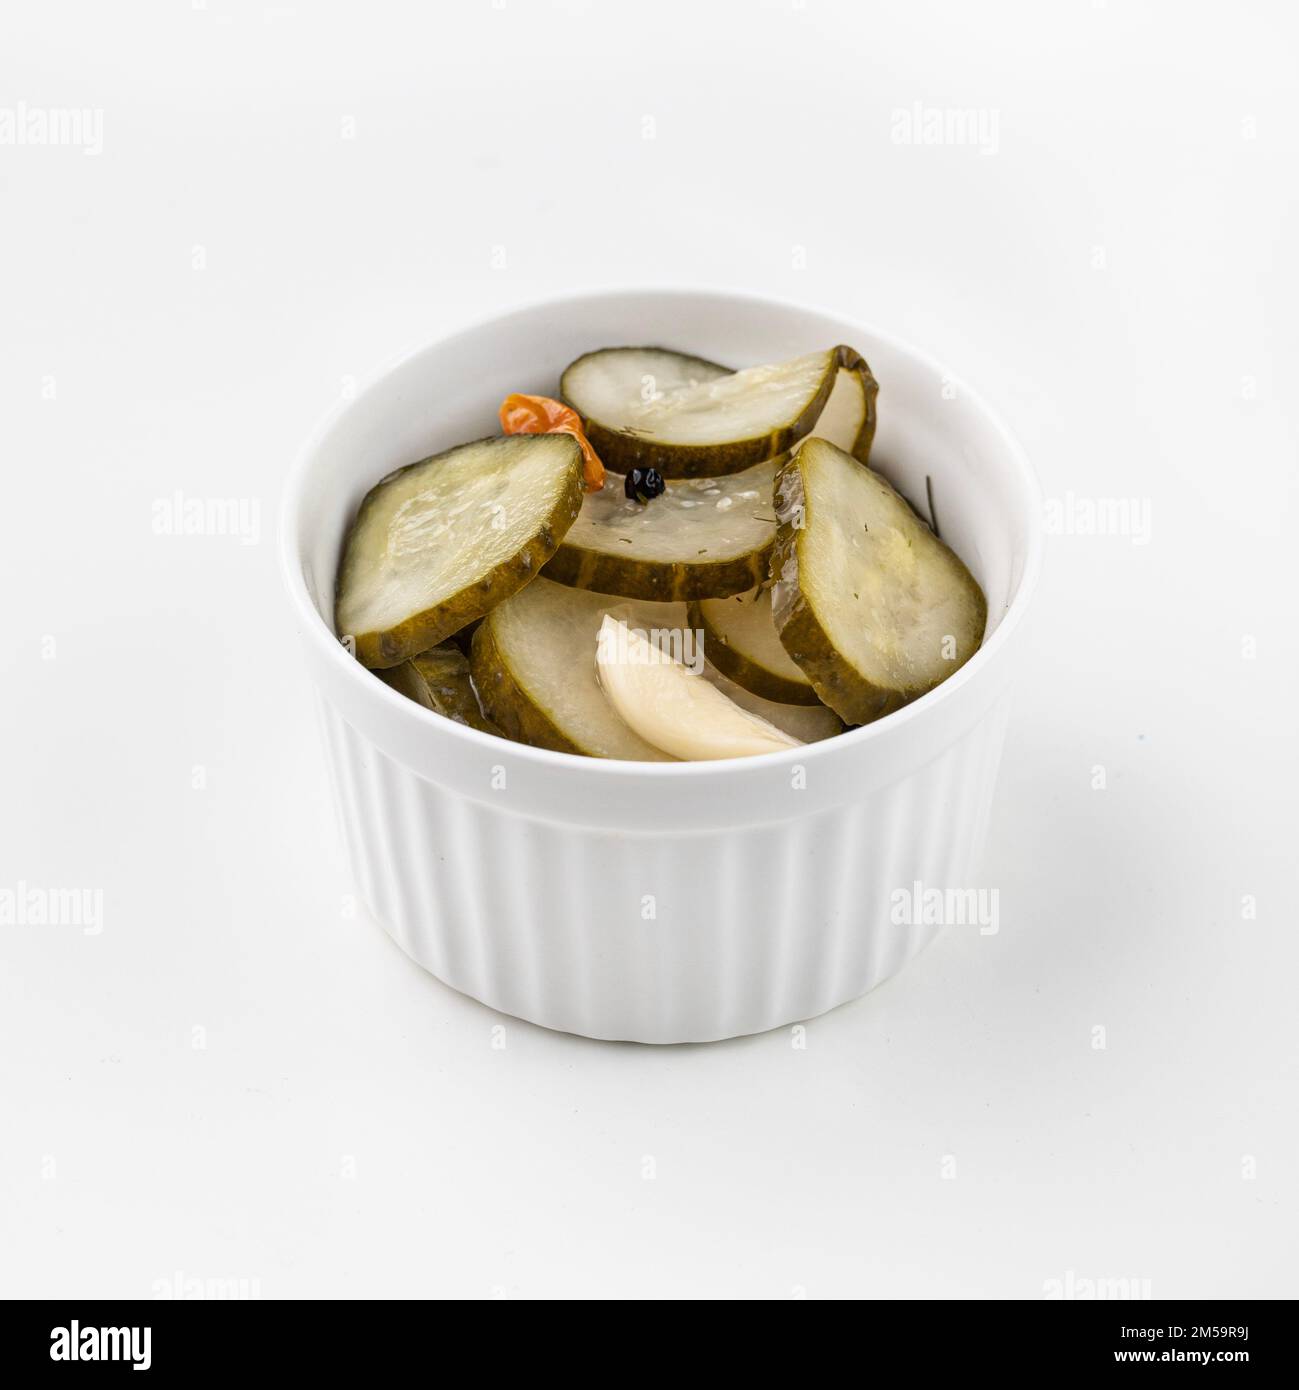 Pickled sliced cucumbers in brine in a bowl on white background. Traditional meat snacks. Healthy fermented food. Stock Photo